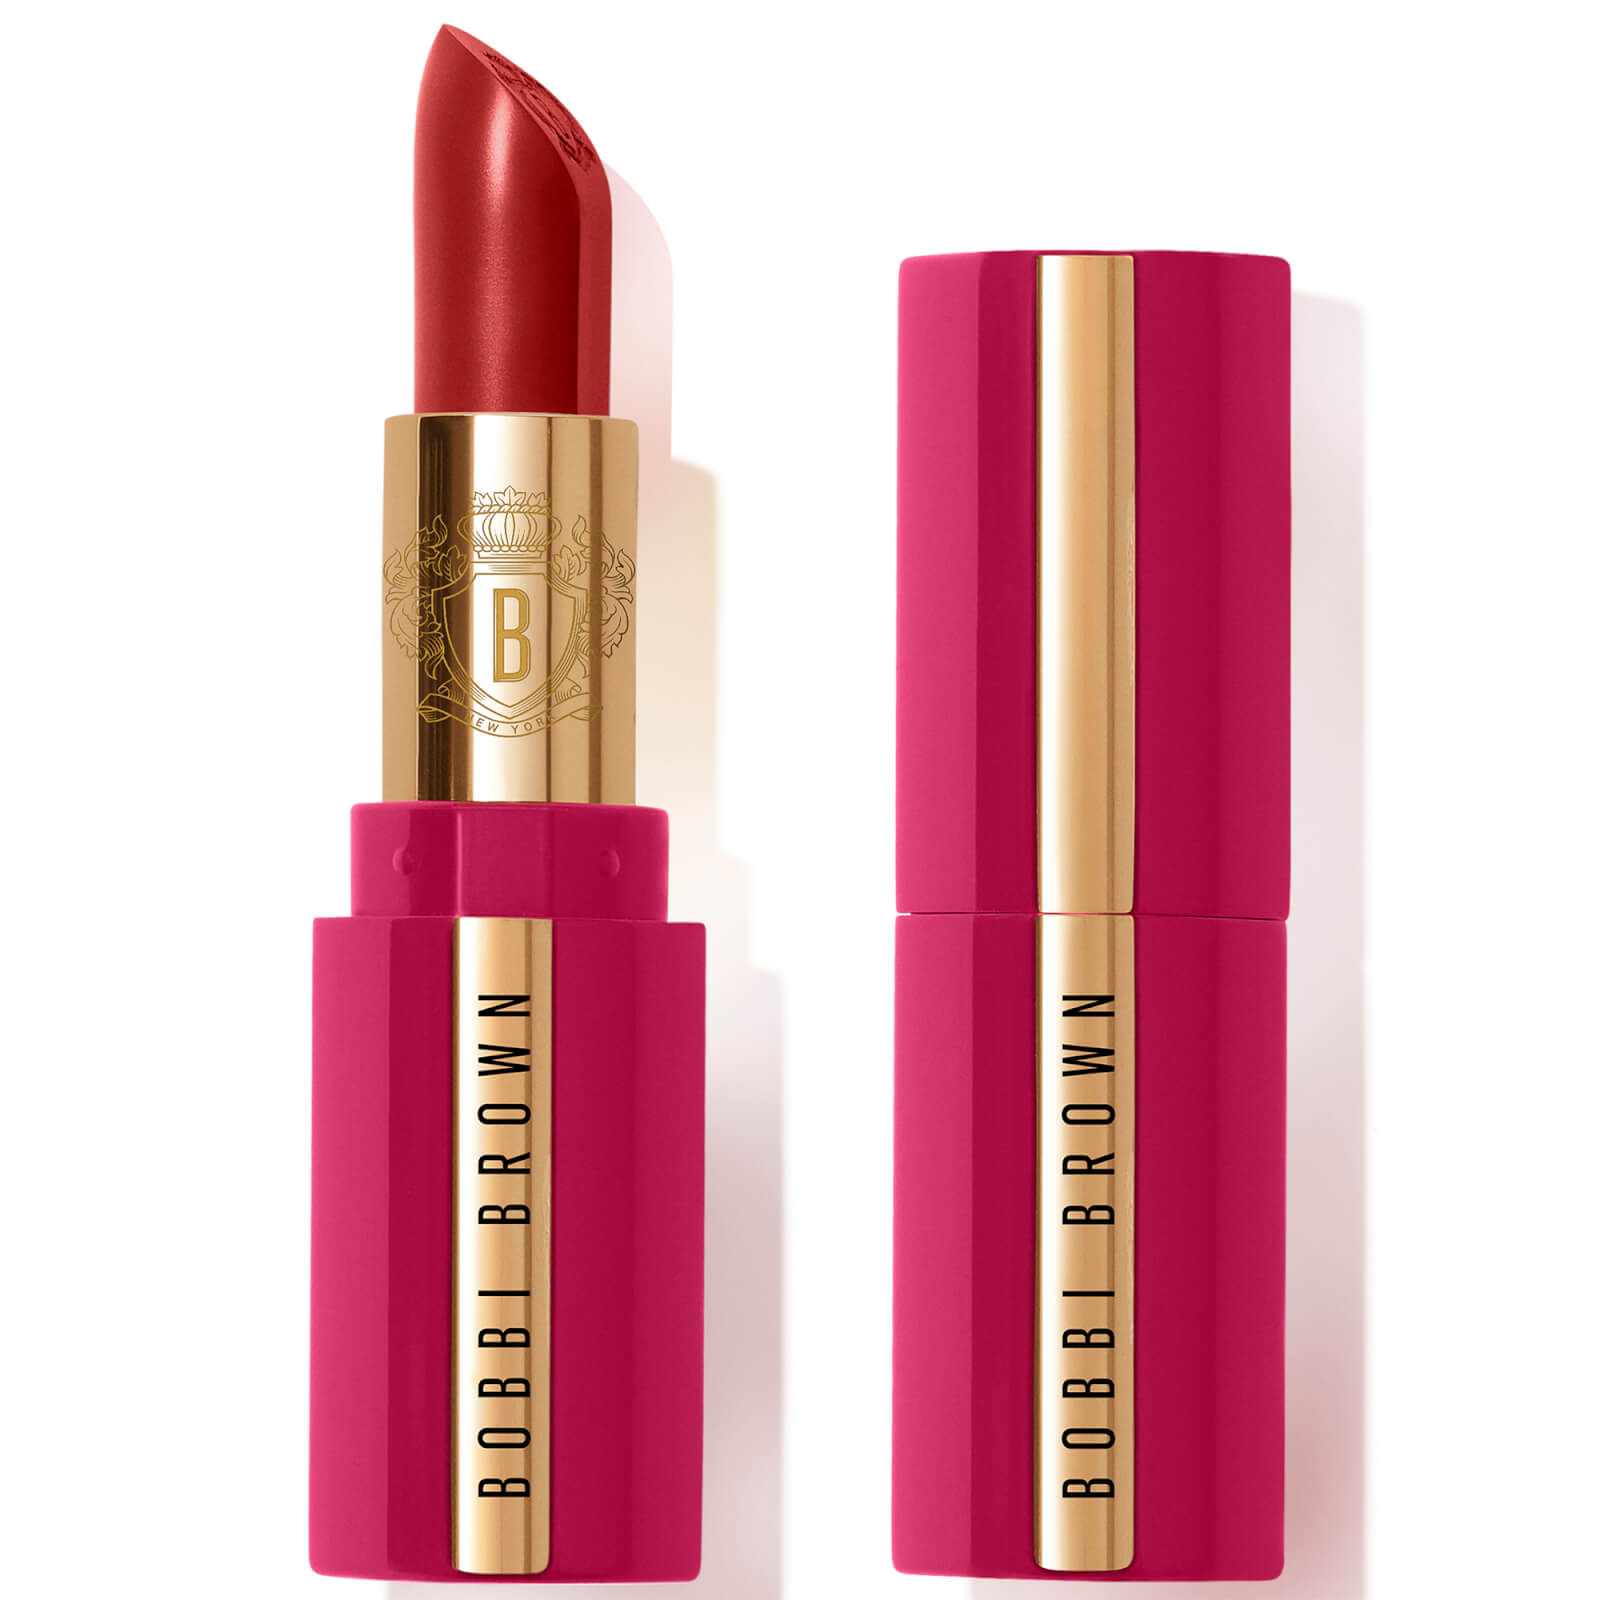 Image of Bobbi Brown Lunar New Year Collection Luxe Lipstick 3.5g (Various Shades) (Worth 45.00€) - Metro/Power Red